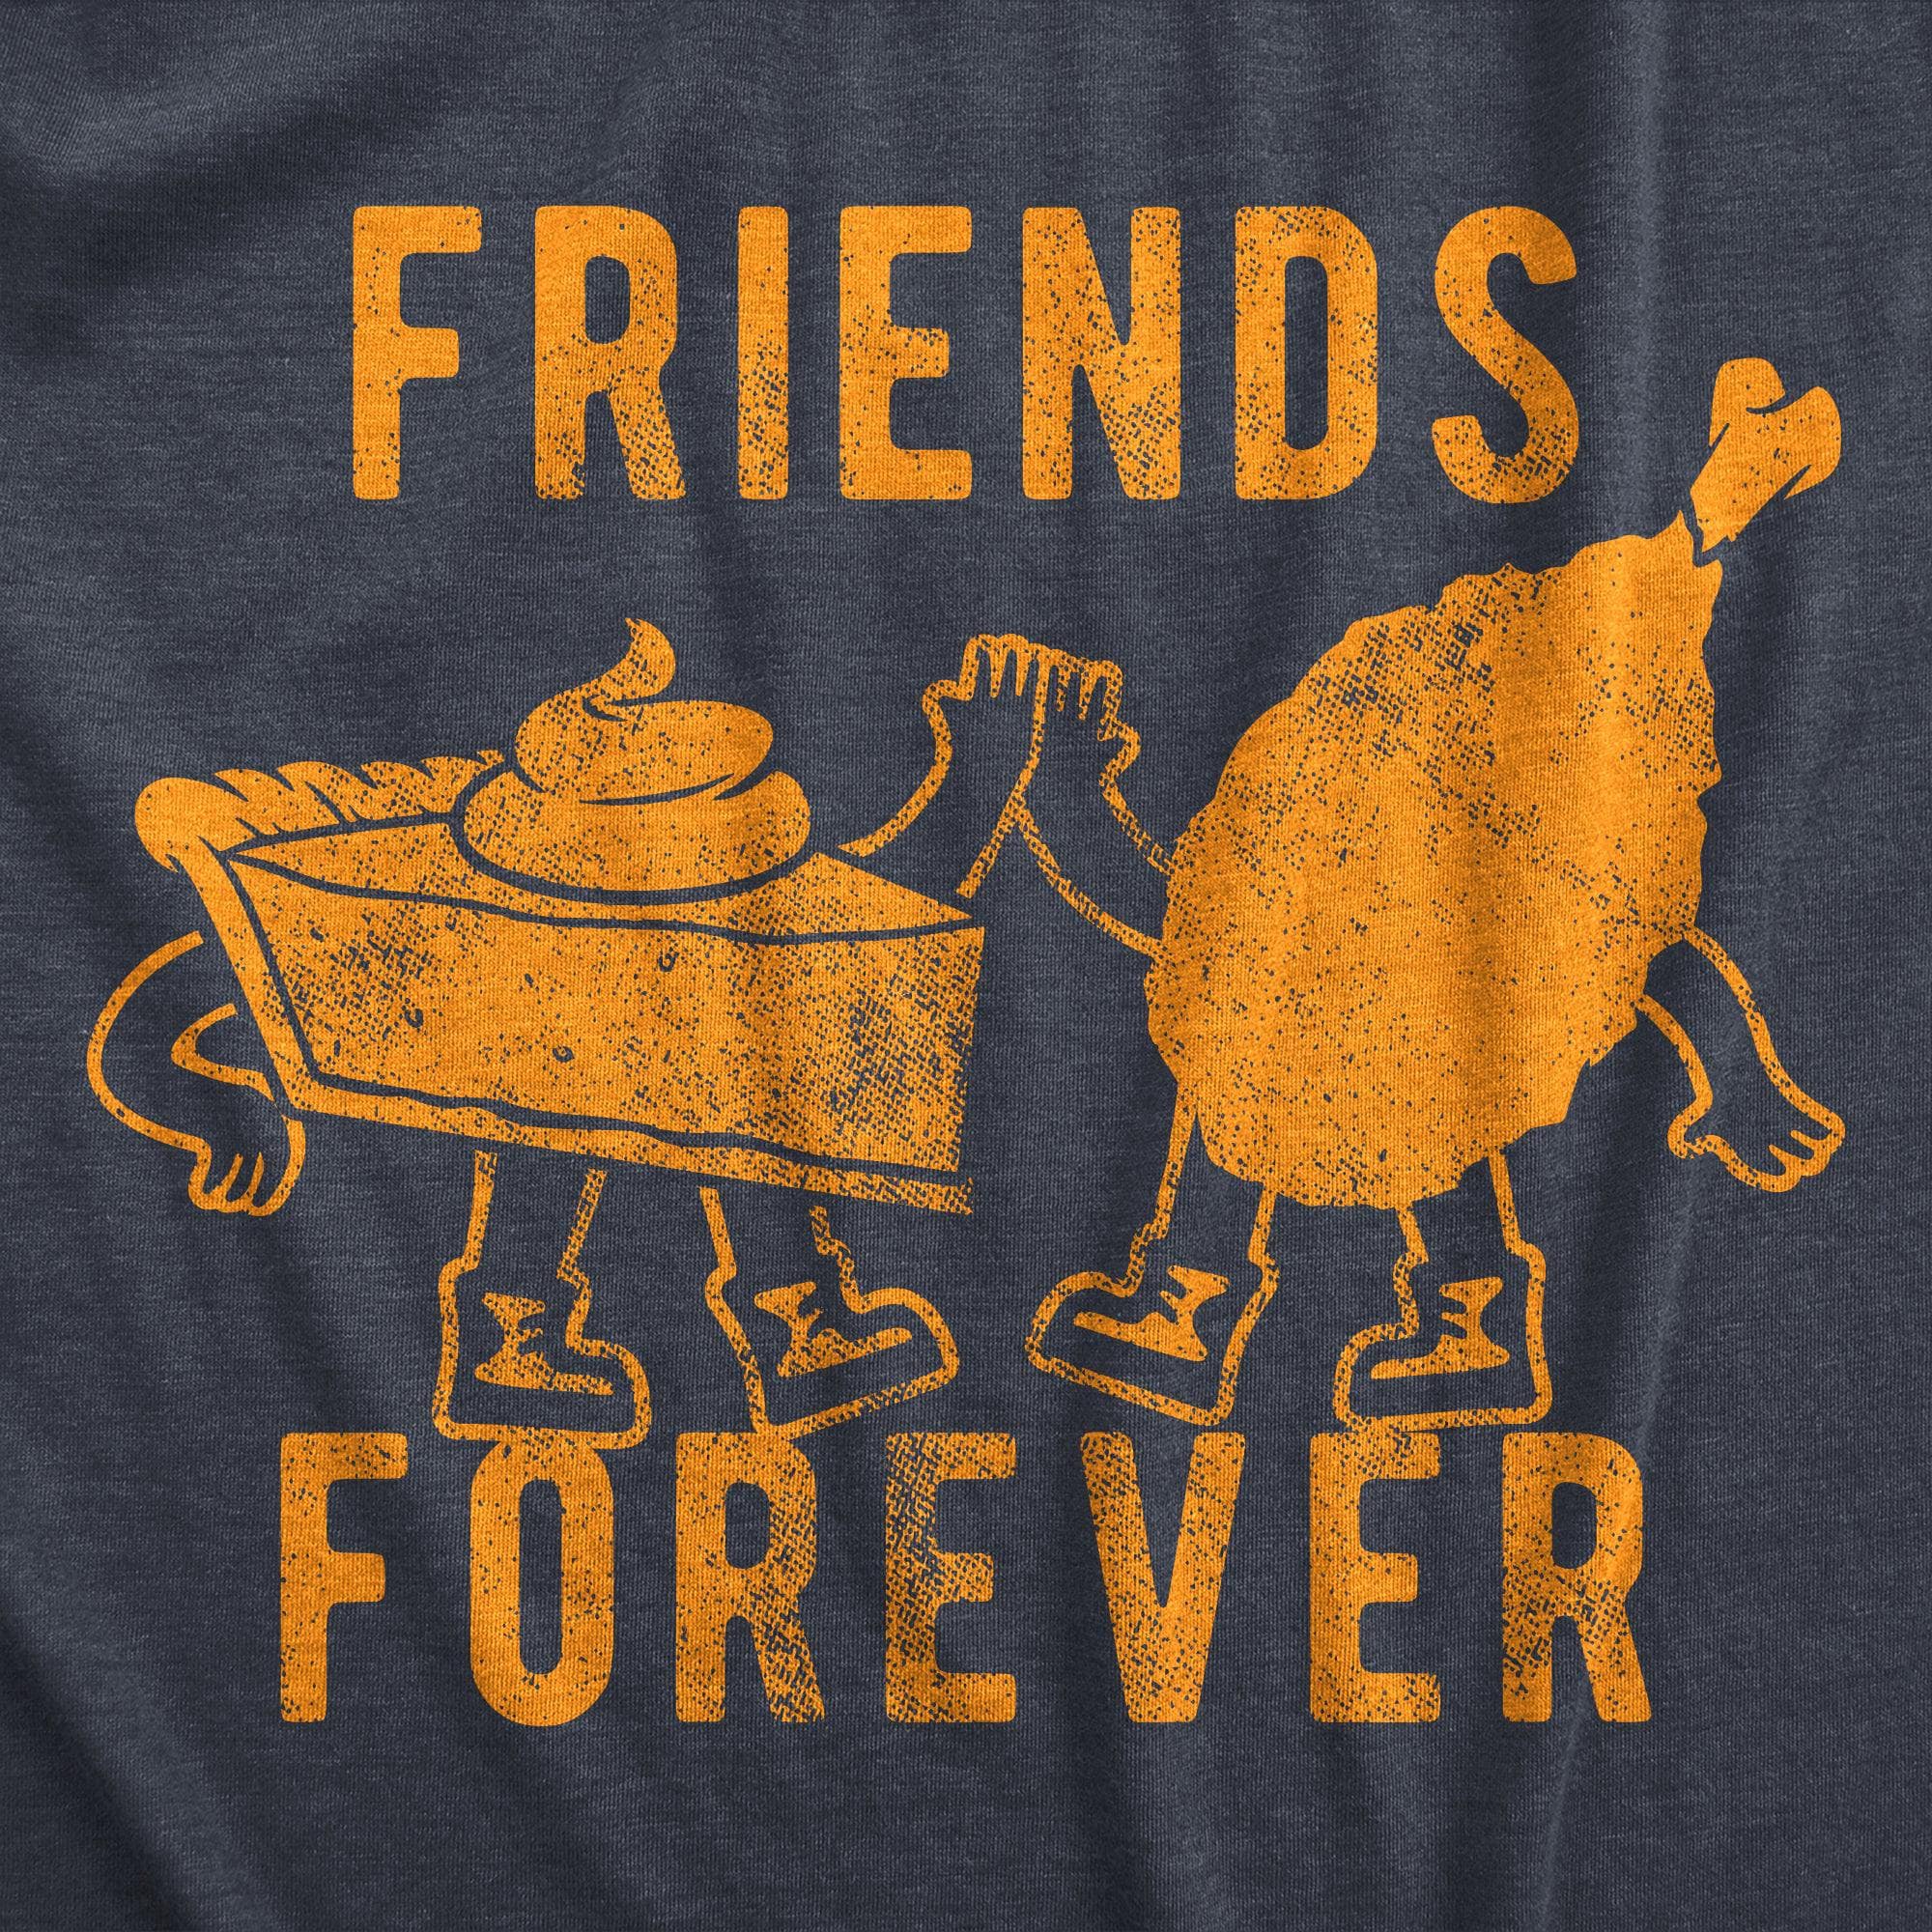 Friends Forever Women's Tshirt  -  Crazy Dog T-Shirts